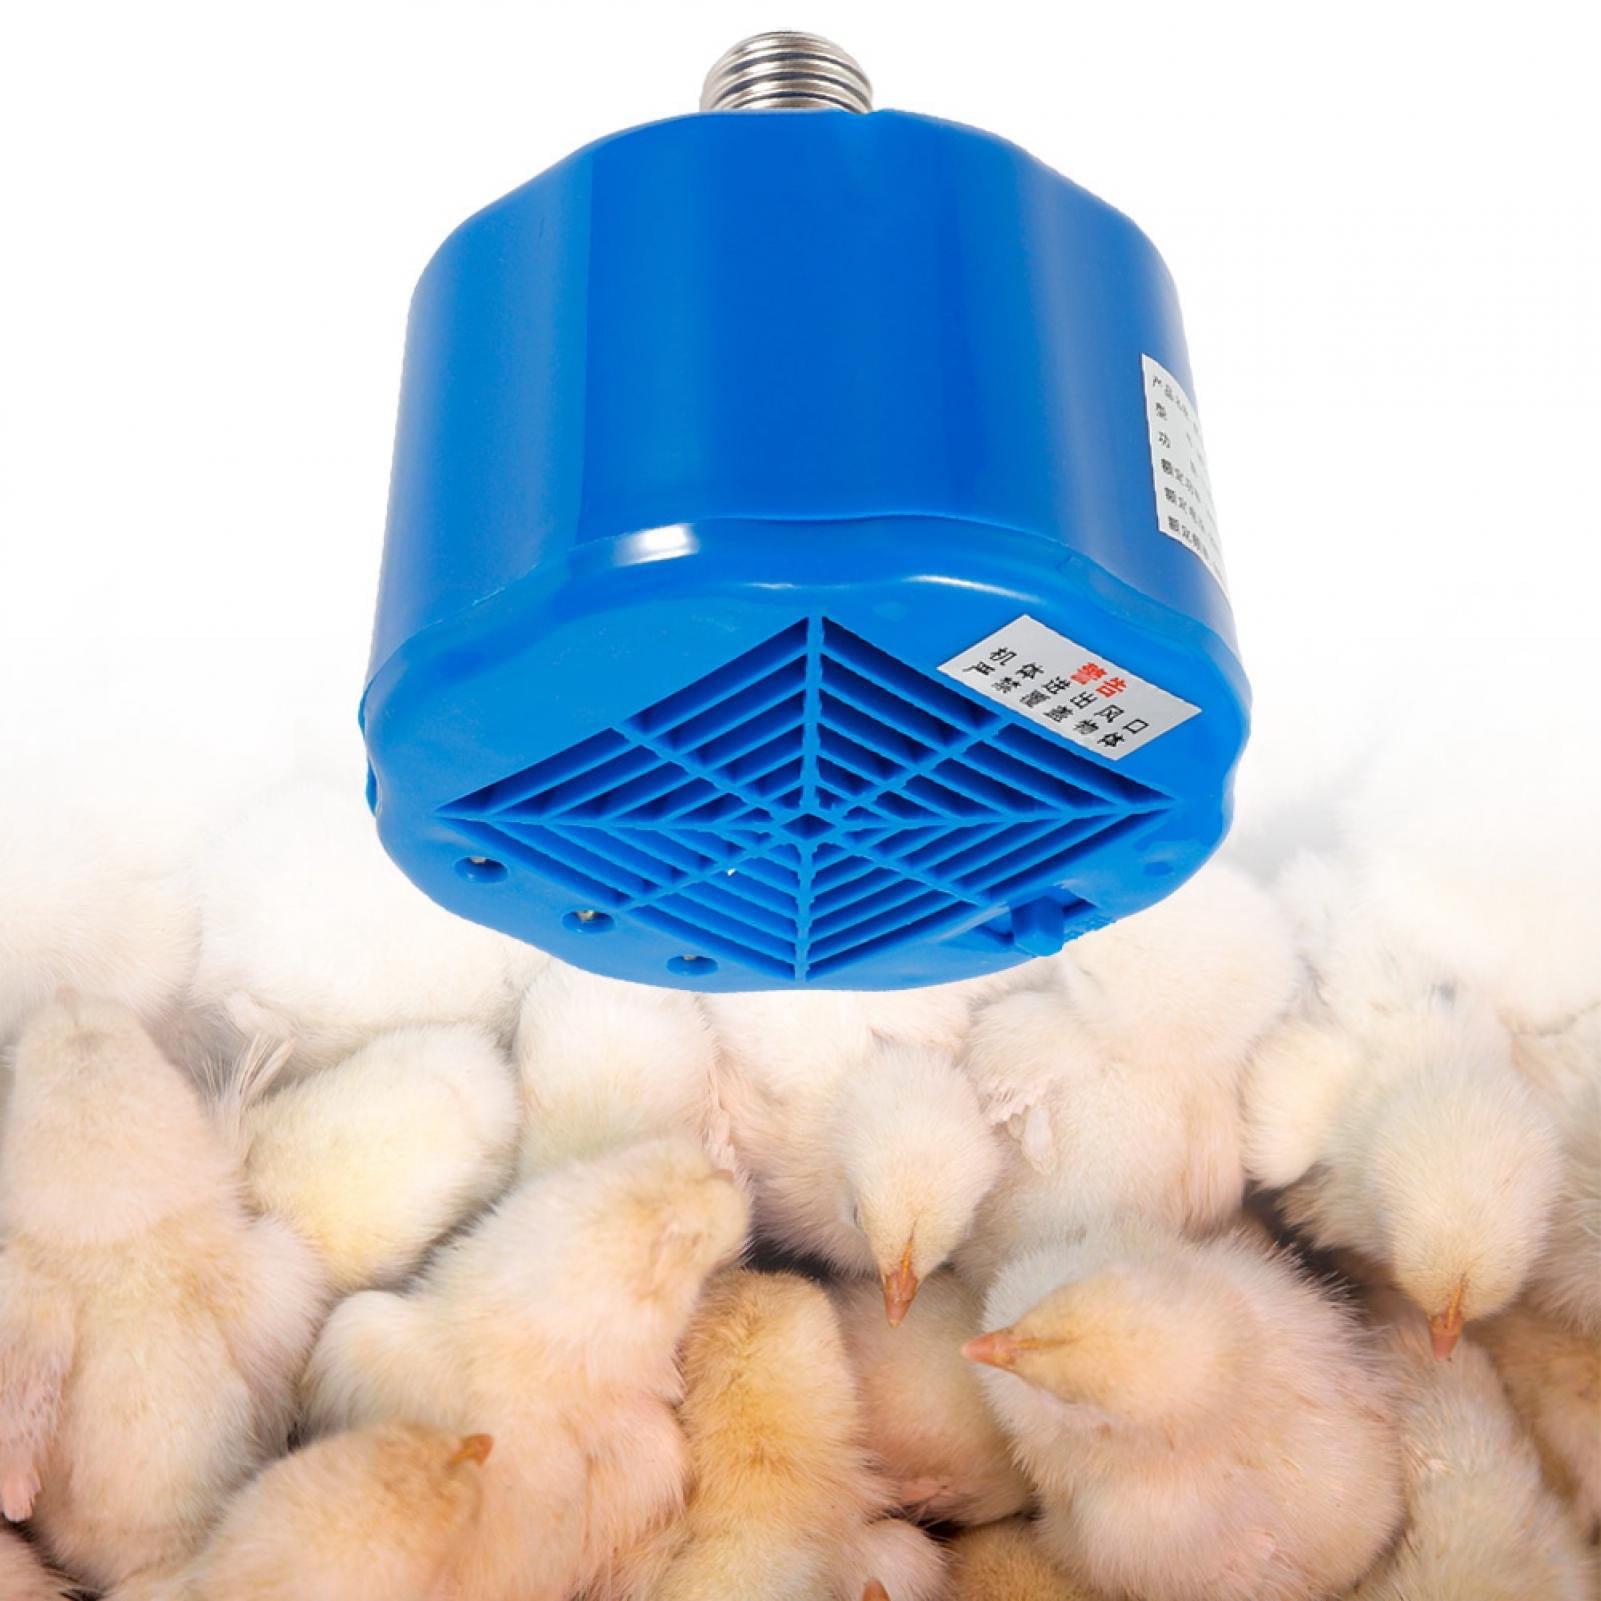 Poultry Cultivation Heat Lamp Bulb Thermostat For Pet Pig Chicken Egg Incubators 